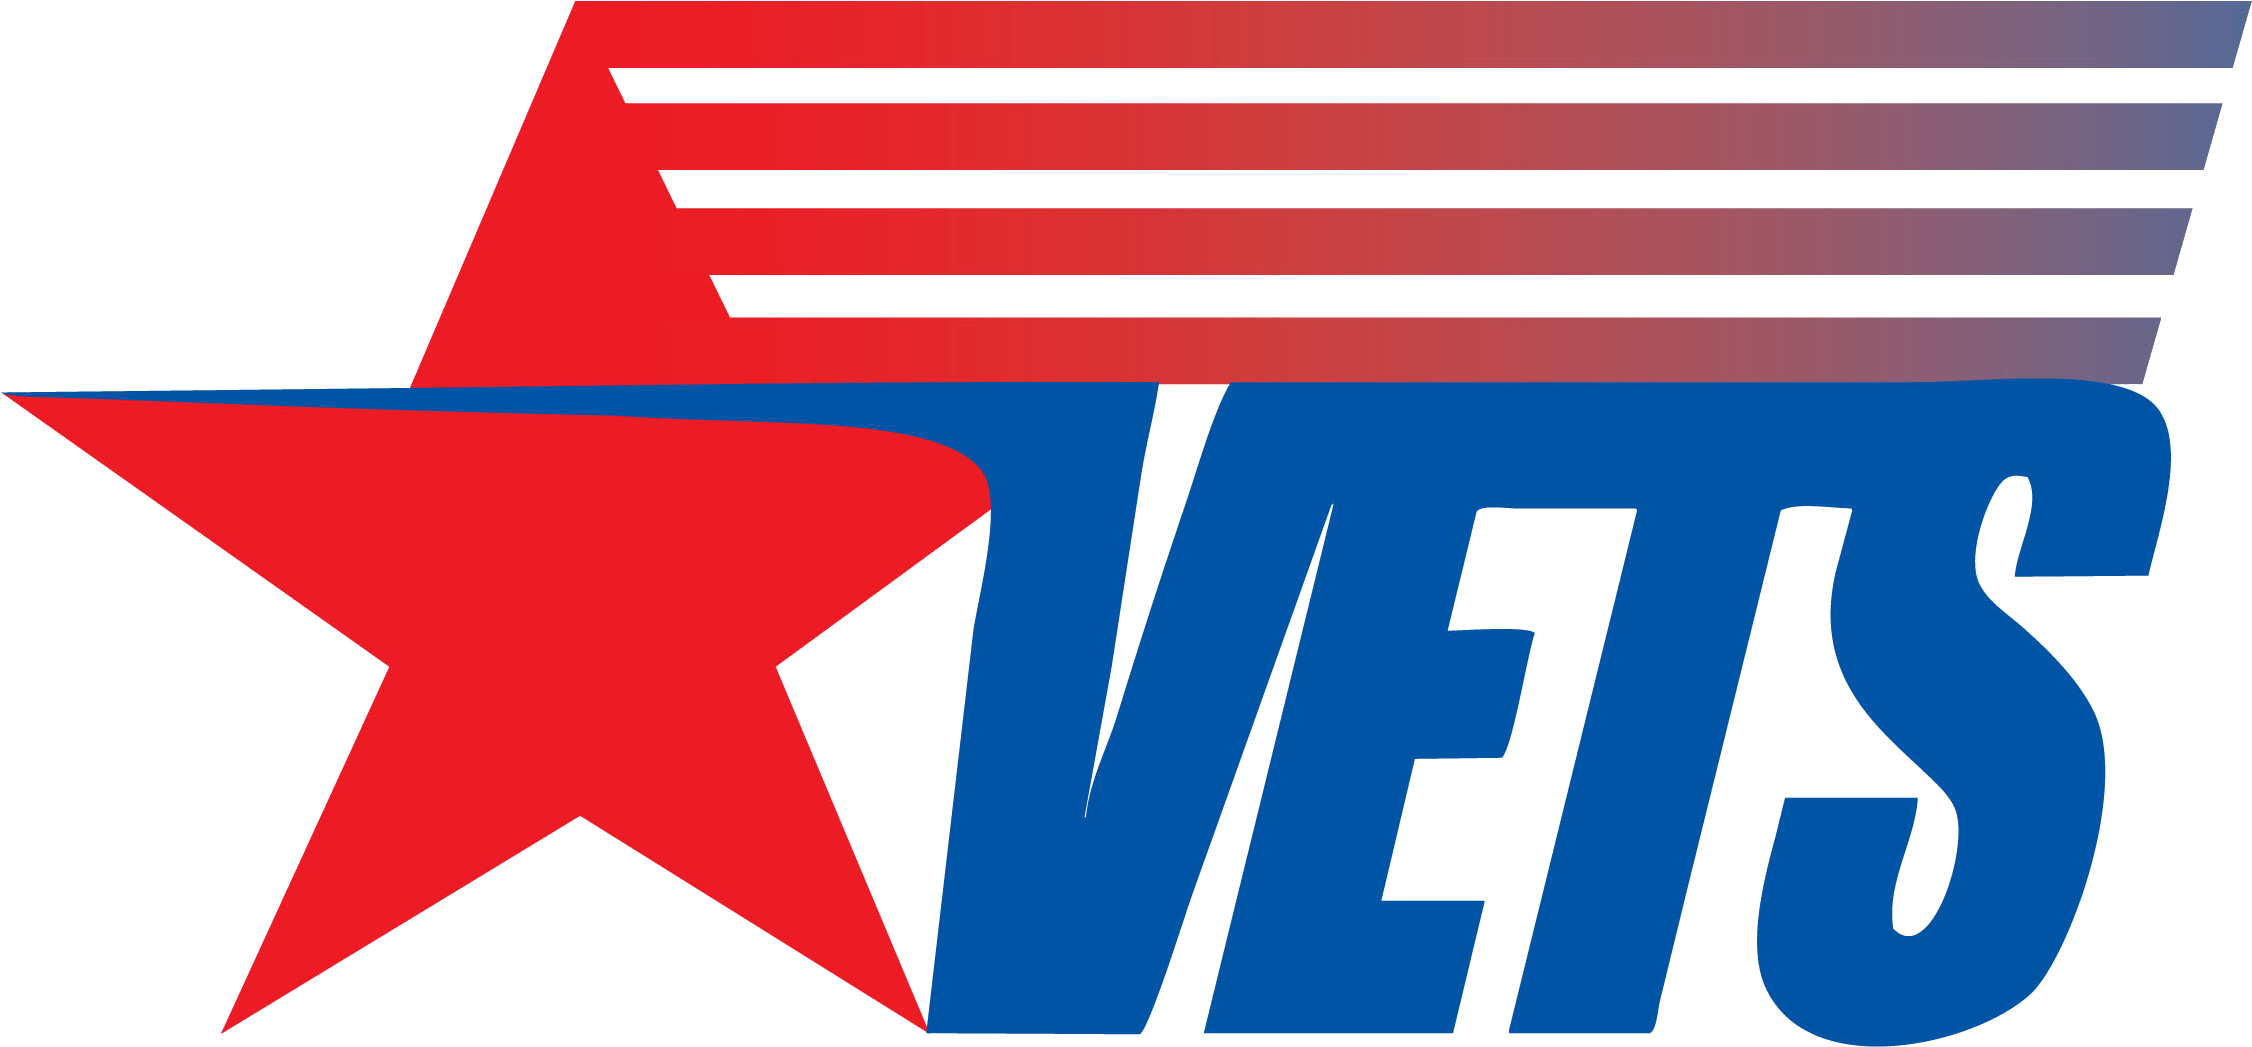 Vets - Veterans' Employment And Training Service (2278x1091)